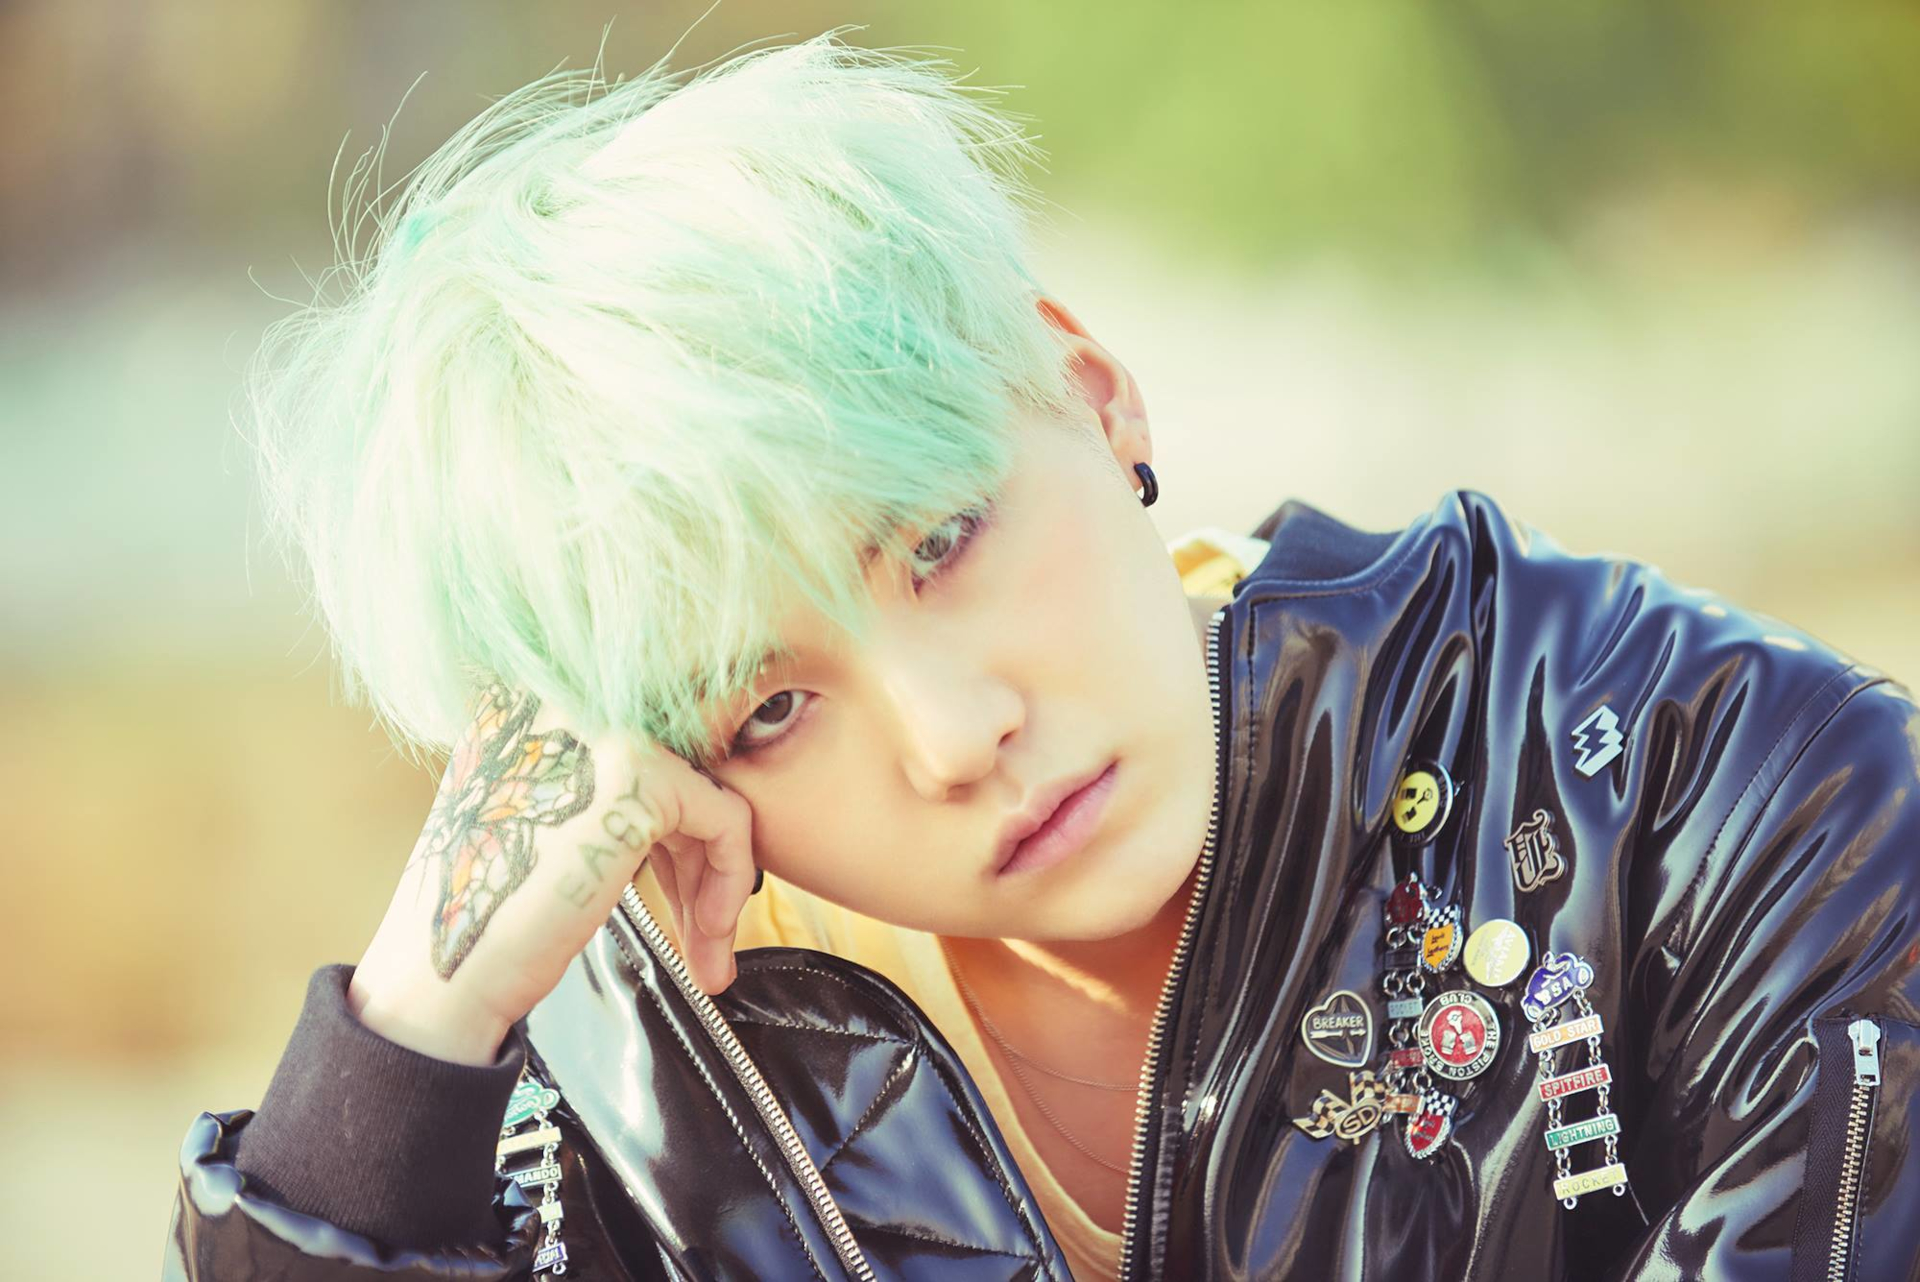 30+ Suga (Singer) HD Wallpapers and Backgrounds